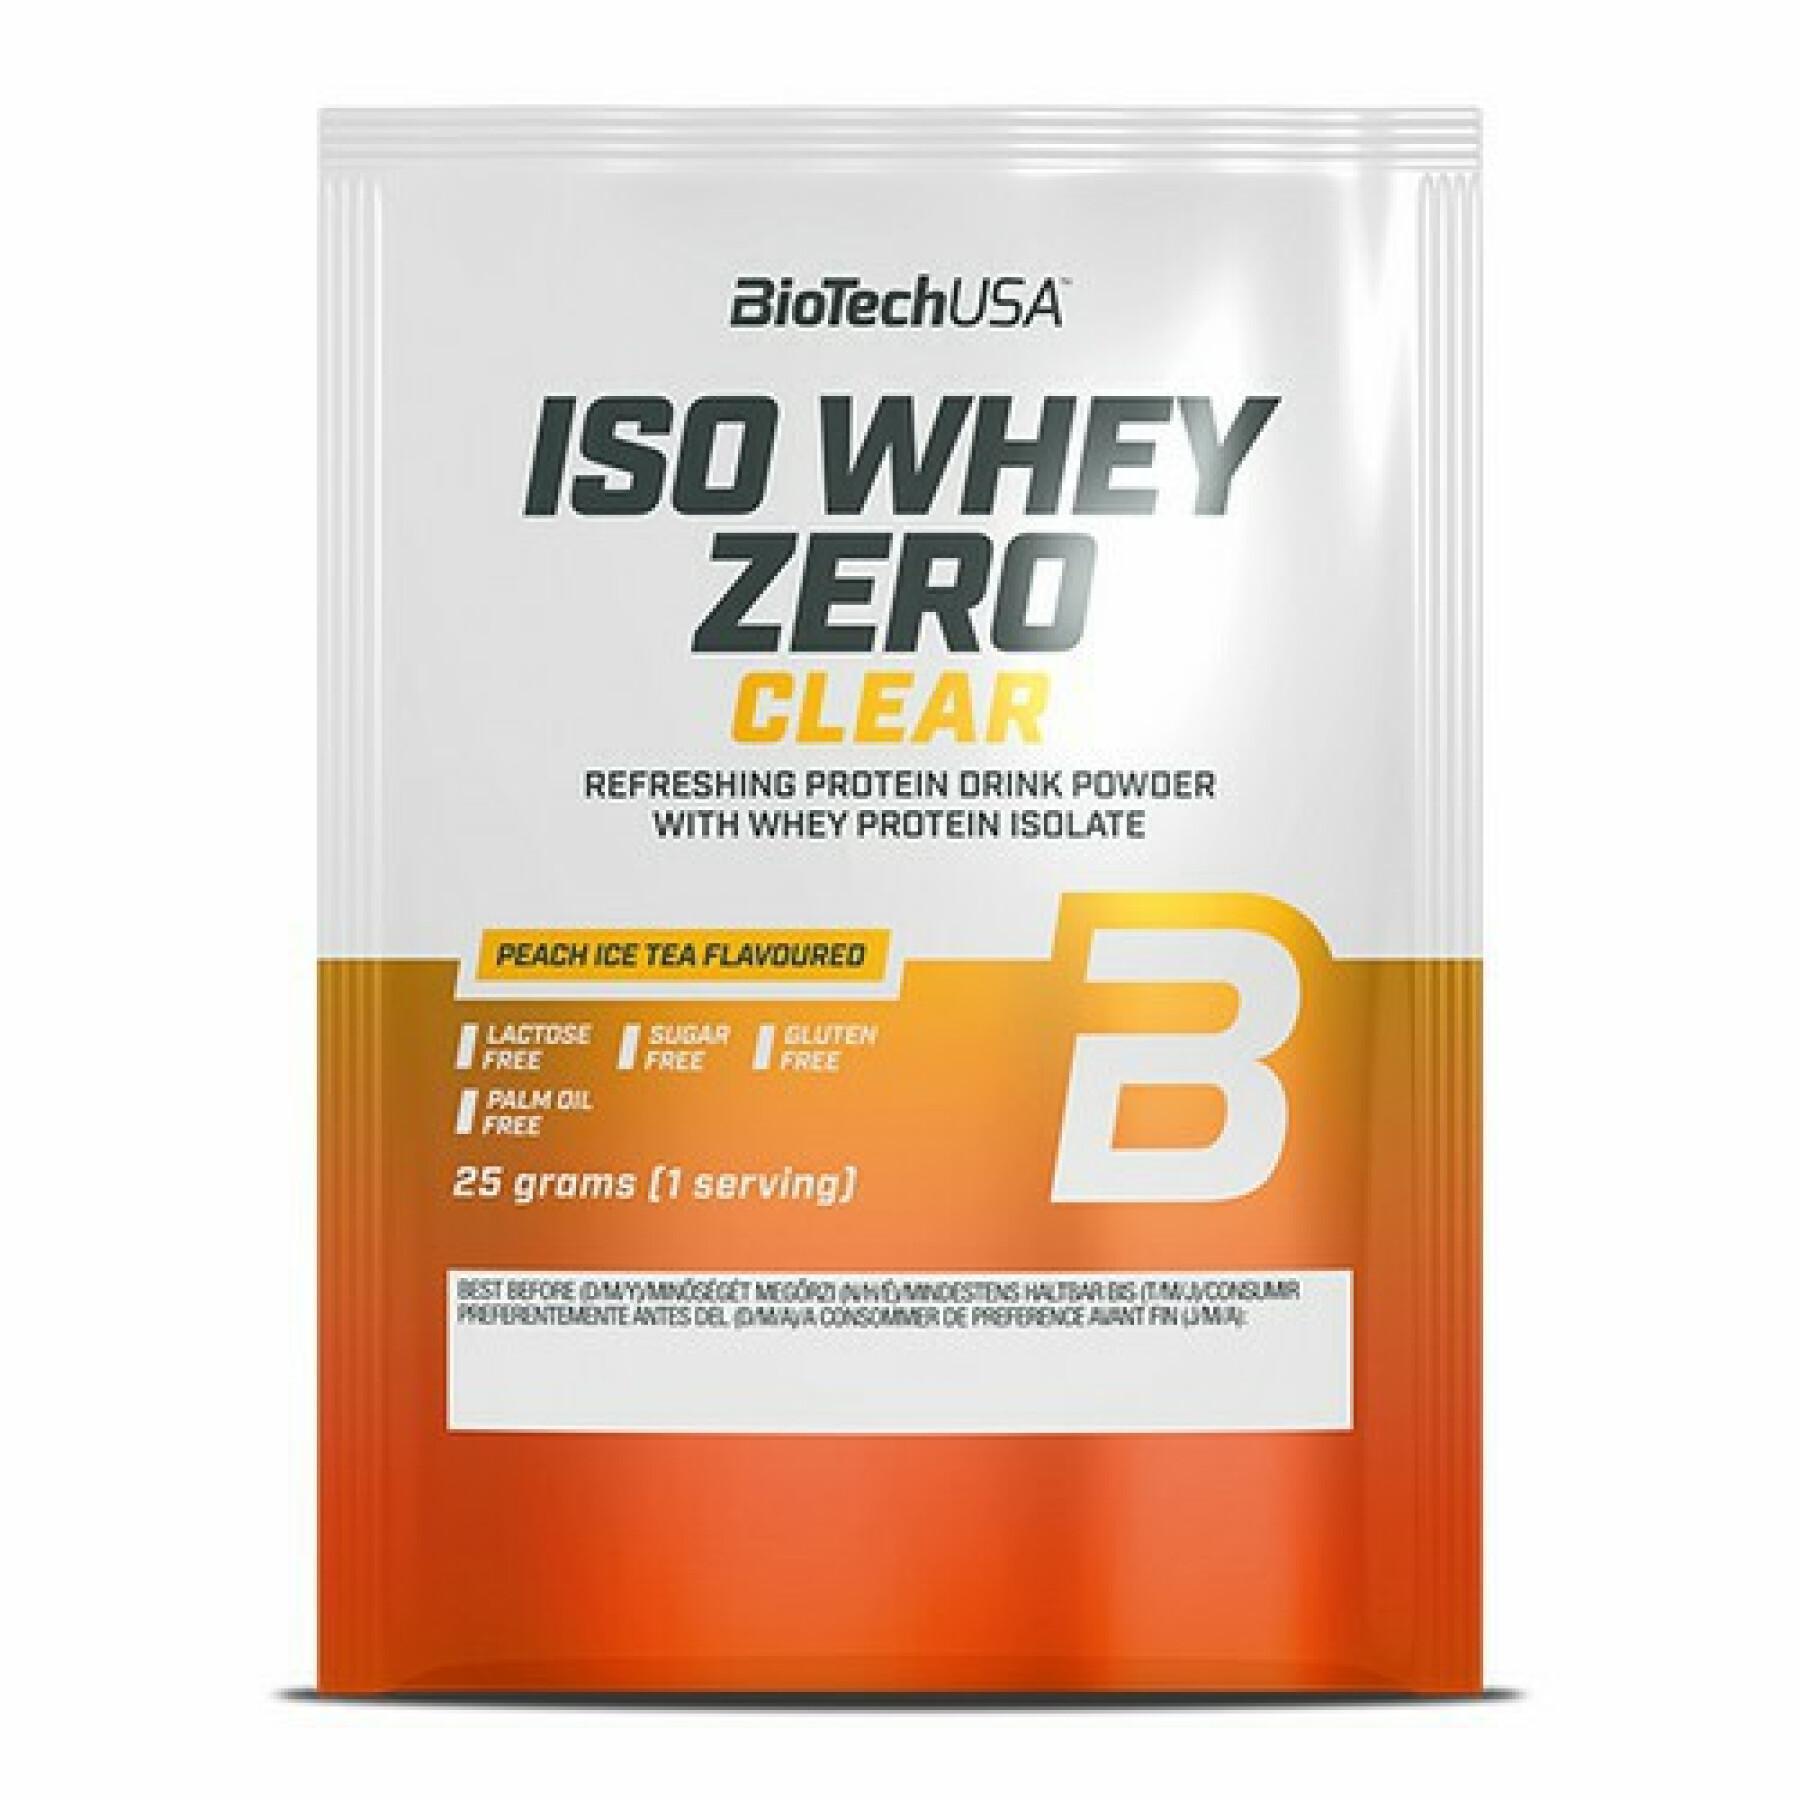 Lots von 50 Proteinbeuteln Biotech Usa iso whey zero clear - Thé glacé aux pêches - 25g